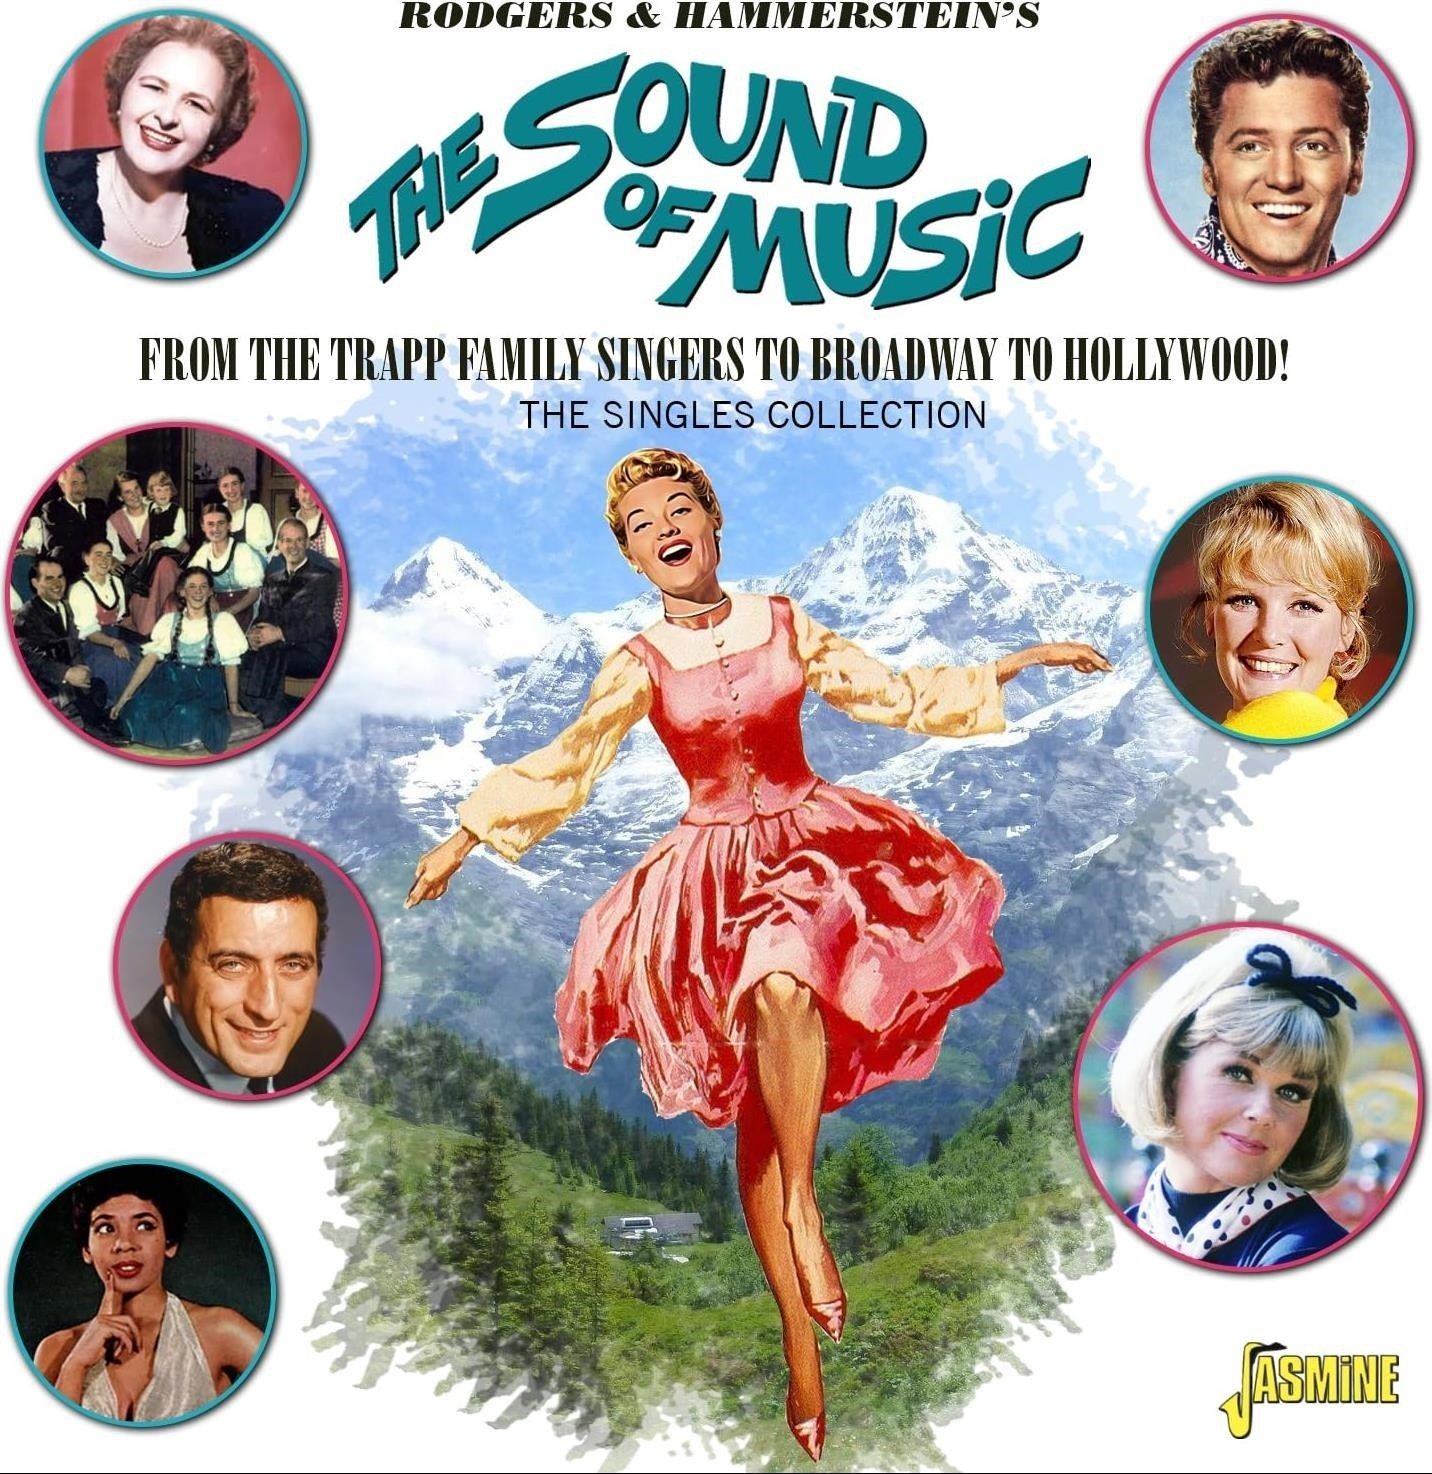 CD Shop - V/A RODGERS & HAMMERSTEIN S THE SOUND OF MUSIC